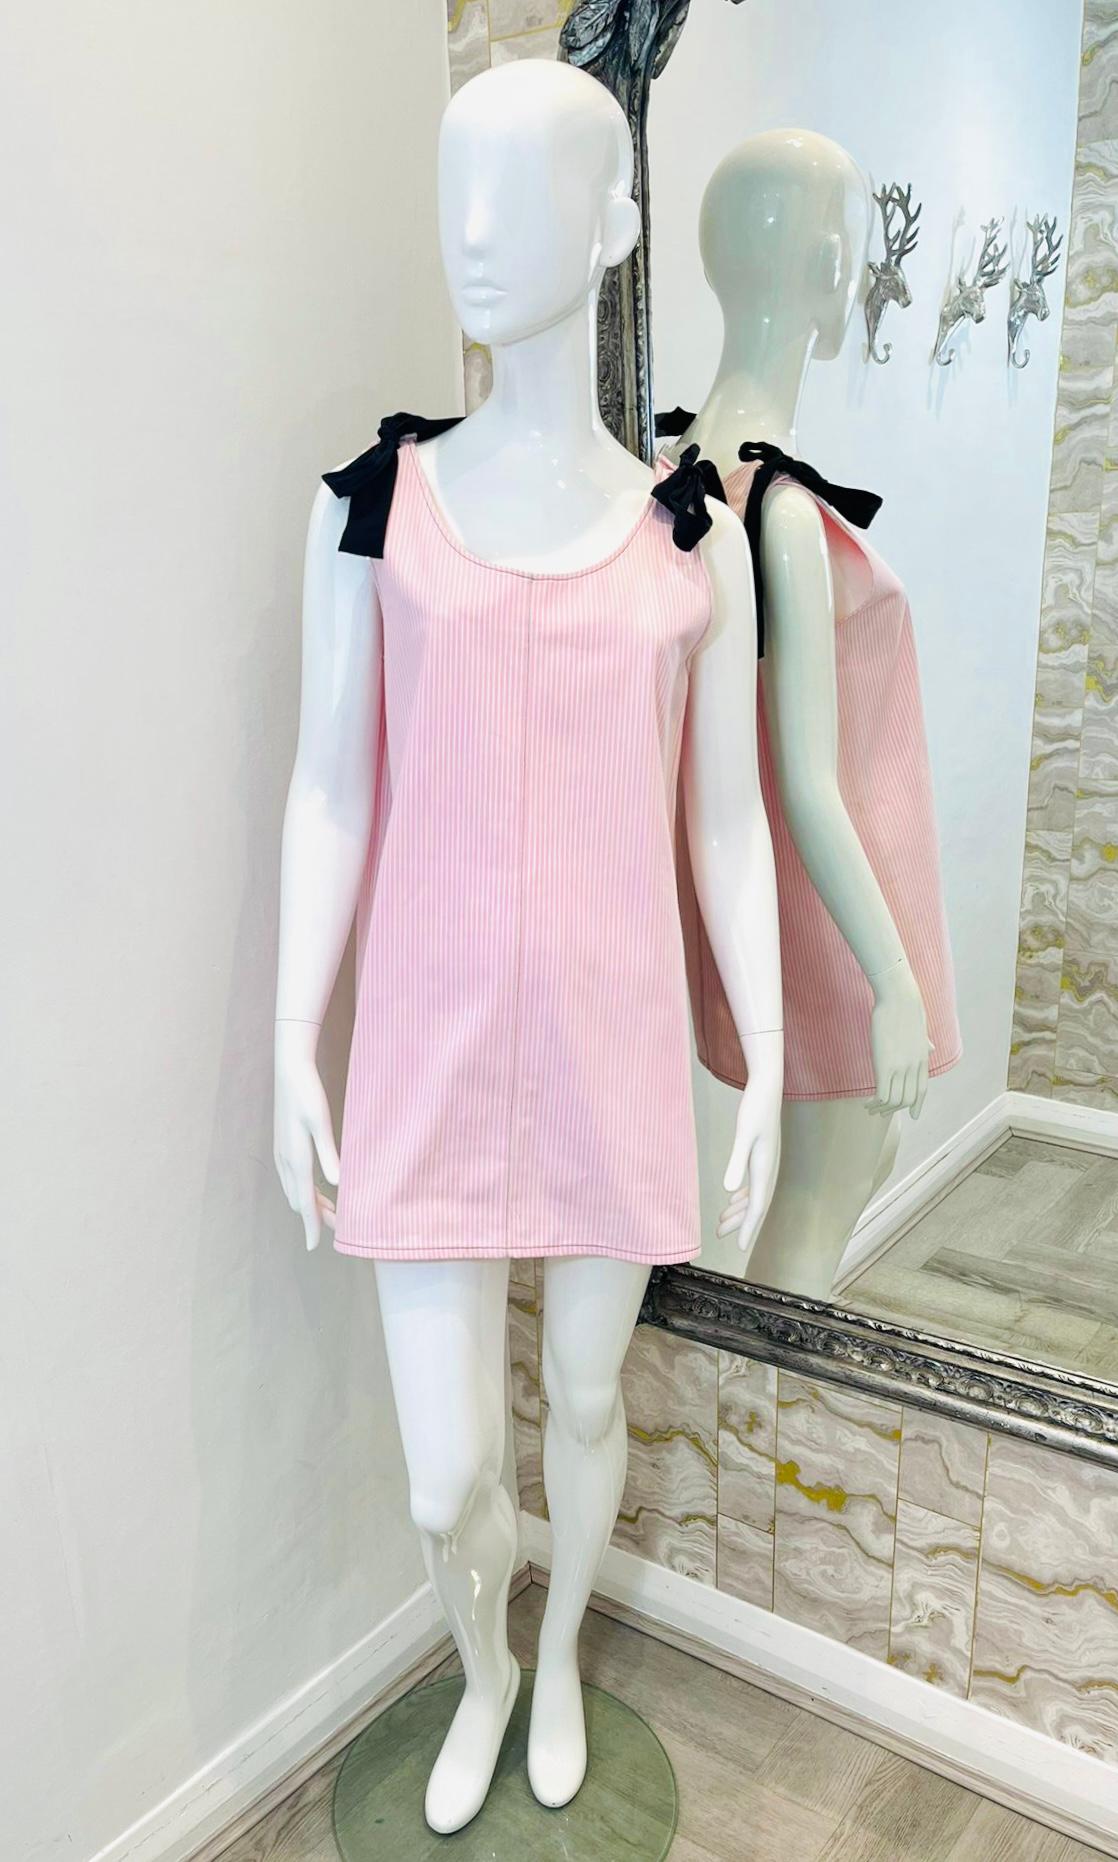 Brand New - Miu Miu Tie-Shoulder Cotton Dress

Baby pink, stripe patterned mini dress.

Designed with black, self-tie detail to the shoulders.

Featuring round neckline and shift silhouette.

Size – 44IT

Condition – Brand New, With